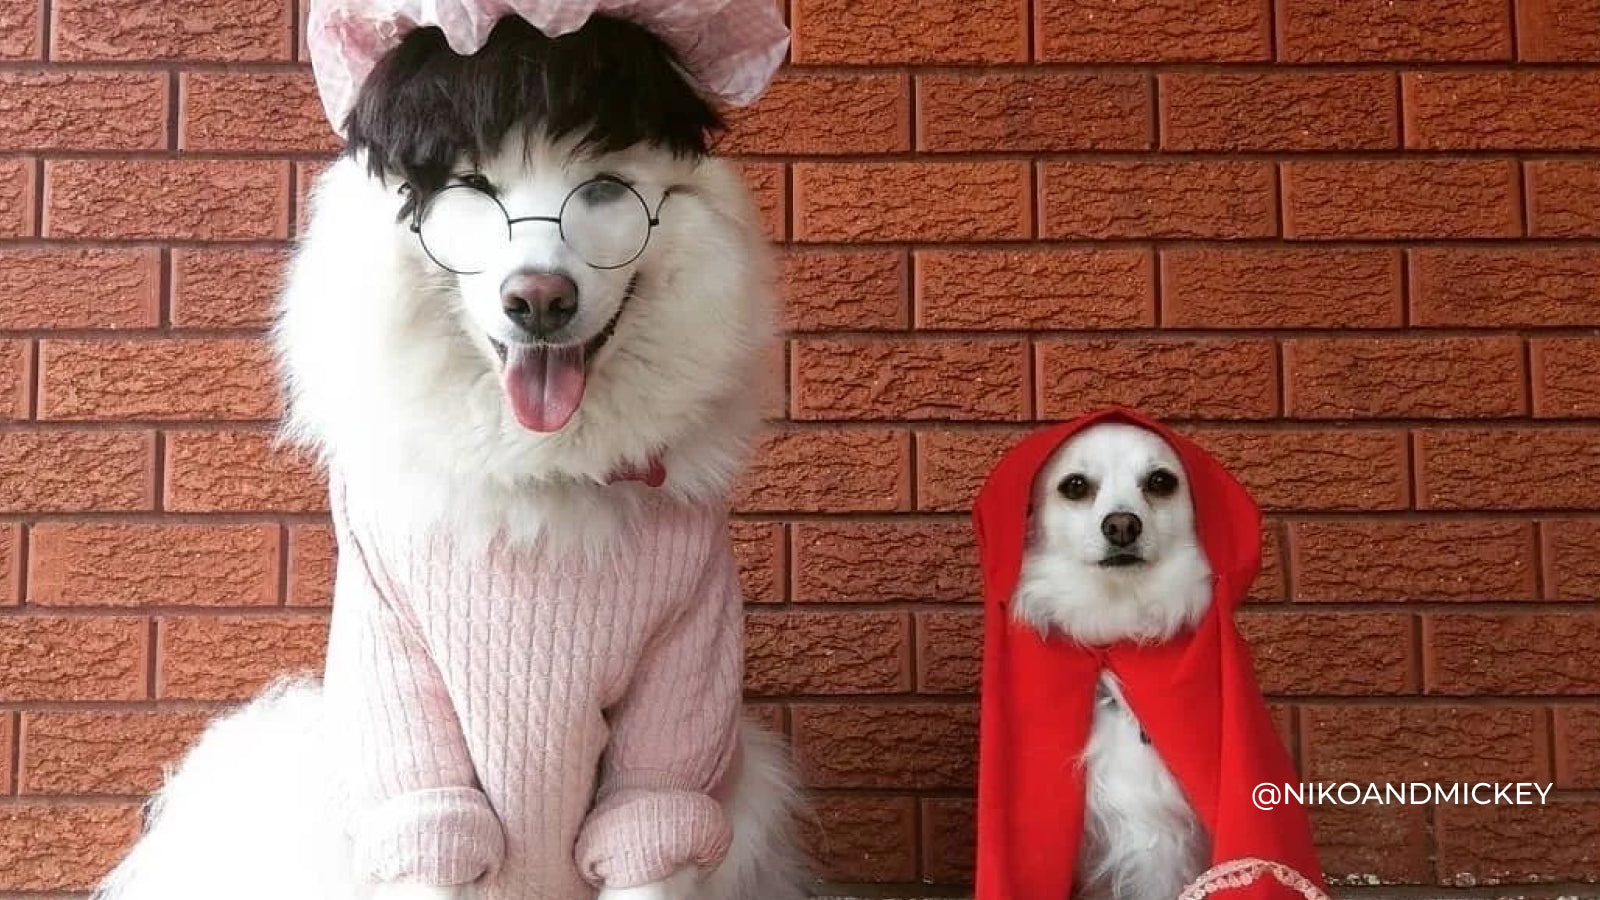 Two white dogs dressed up as Red Riding Hood characters